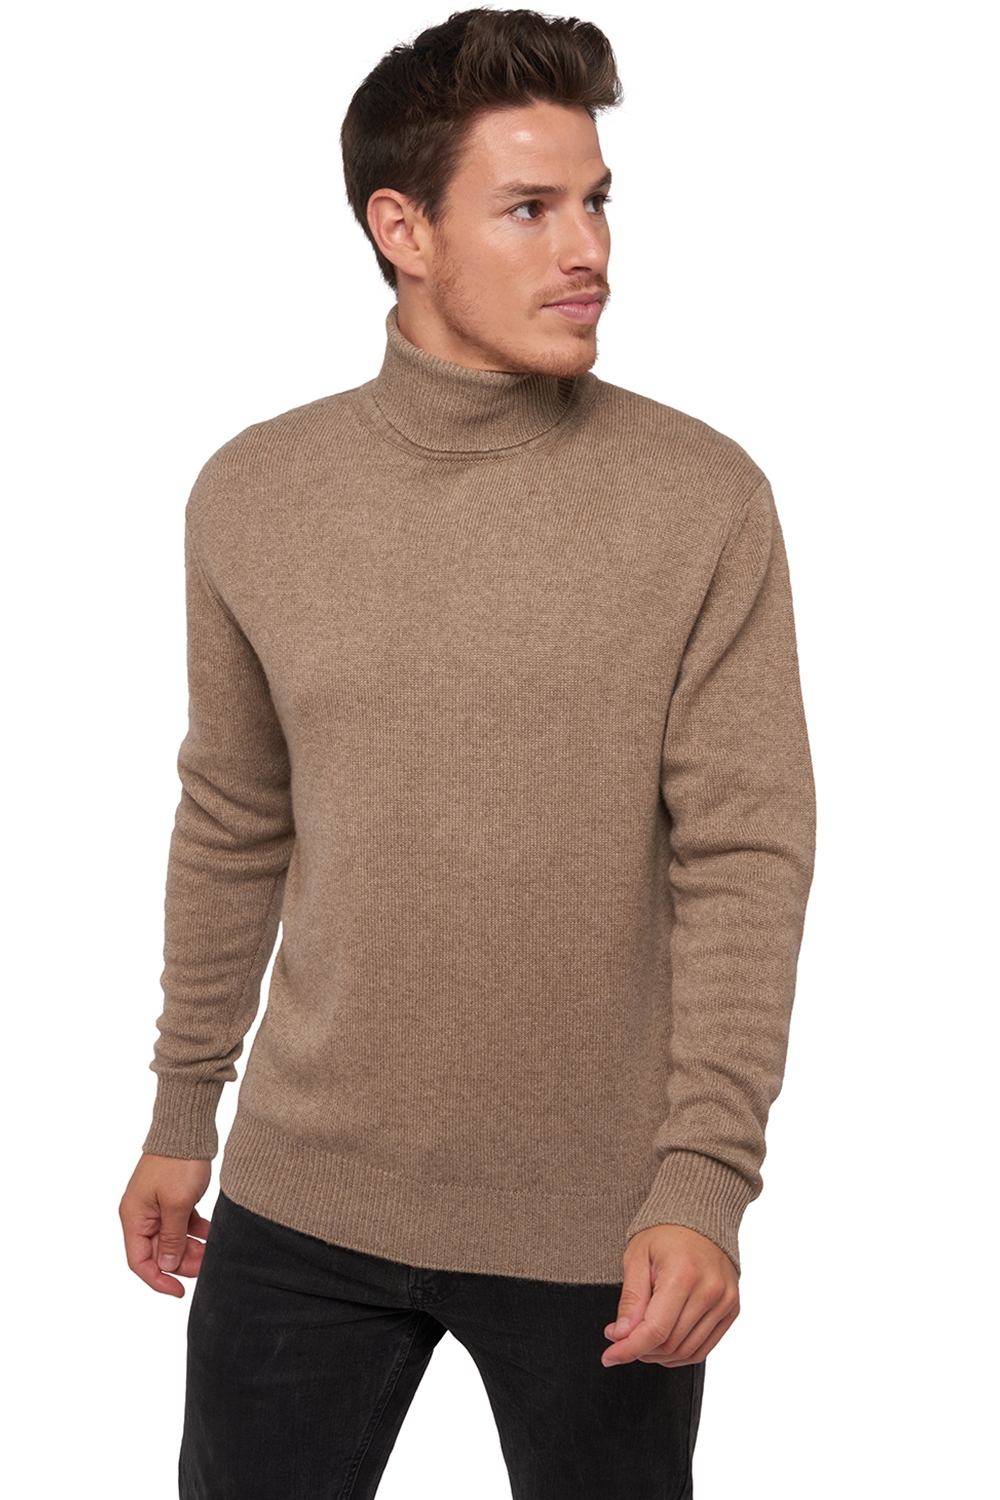 Cachemire pull homme les intemporels edgar 4f natural brown s